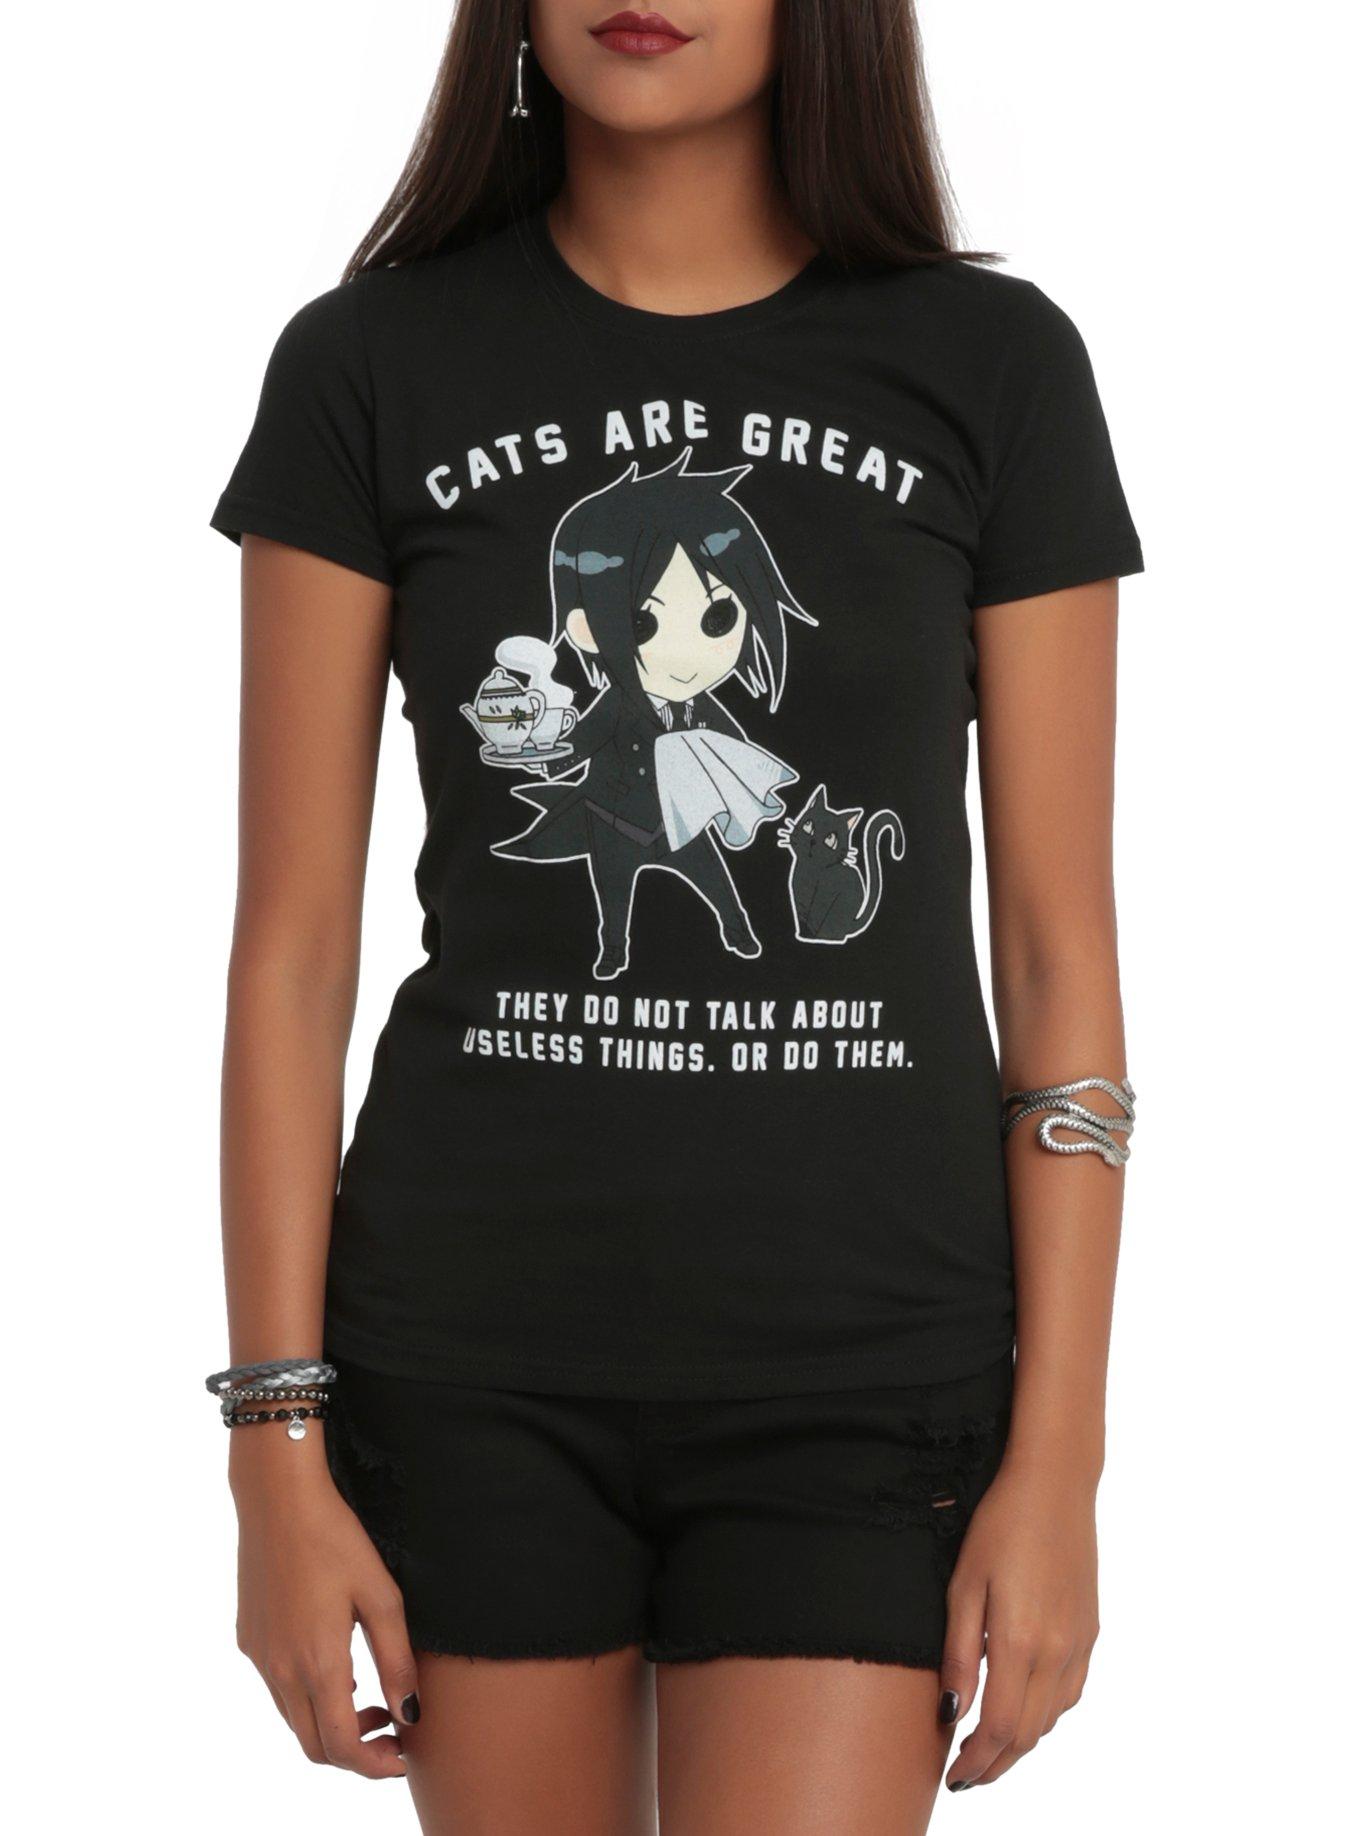 Black Butler Cats Are Great Girls T-Shirt, BLACK, hi-res